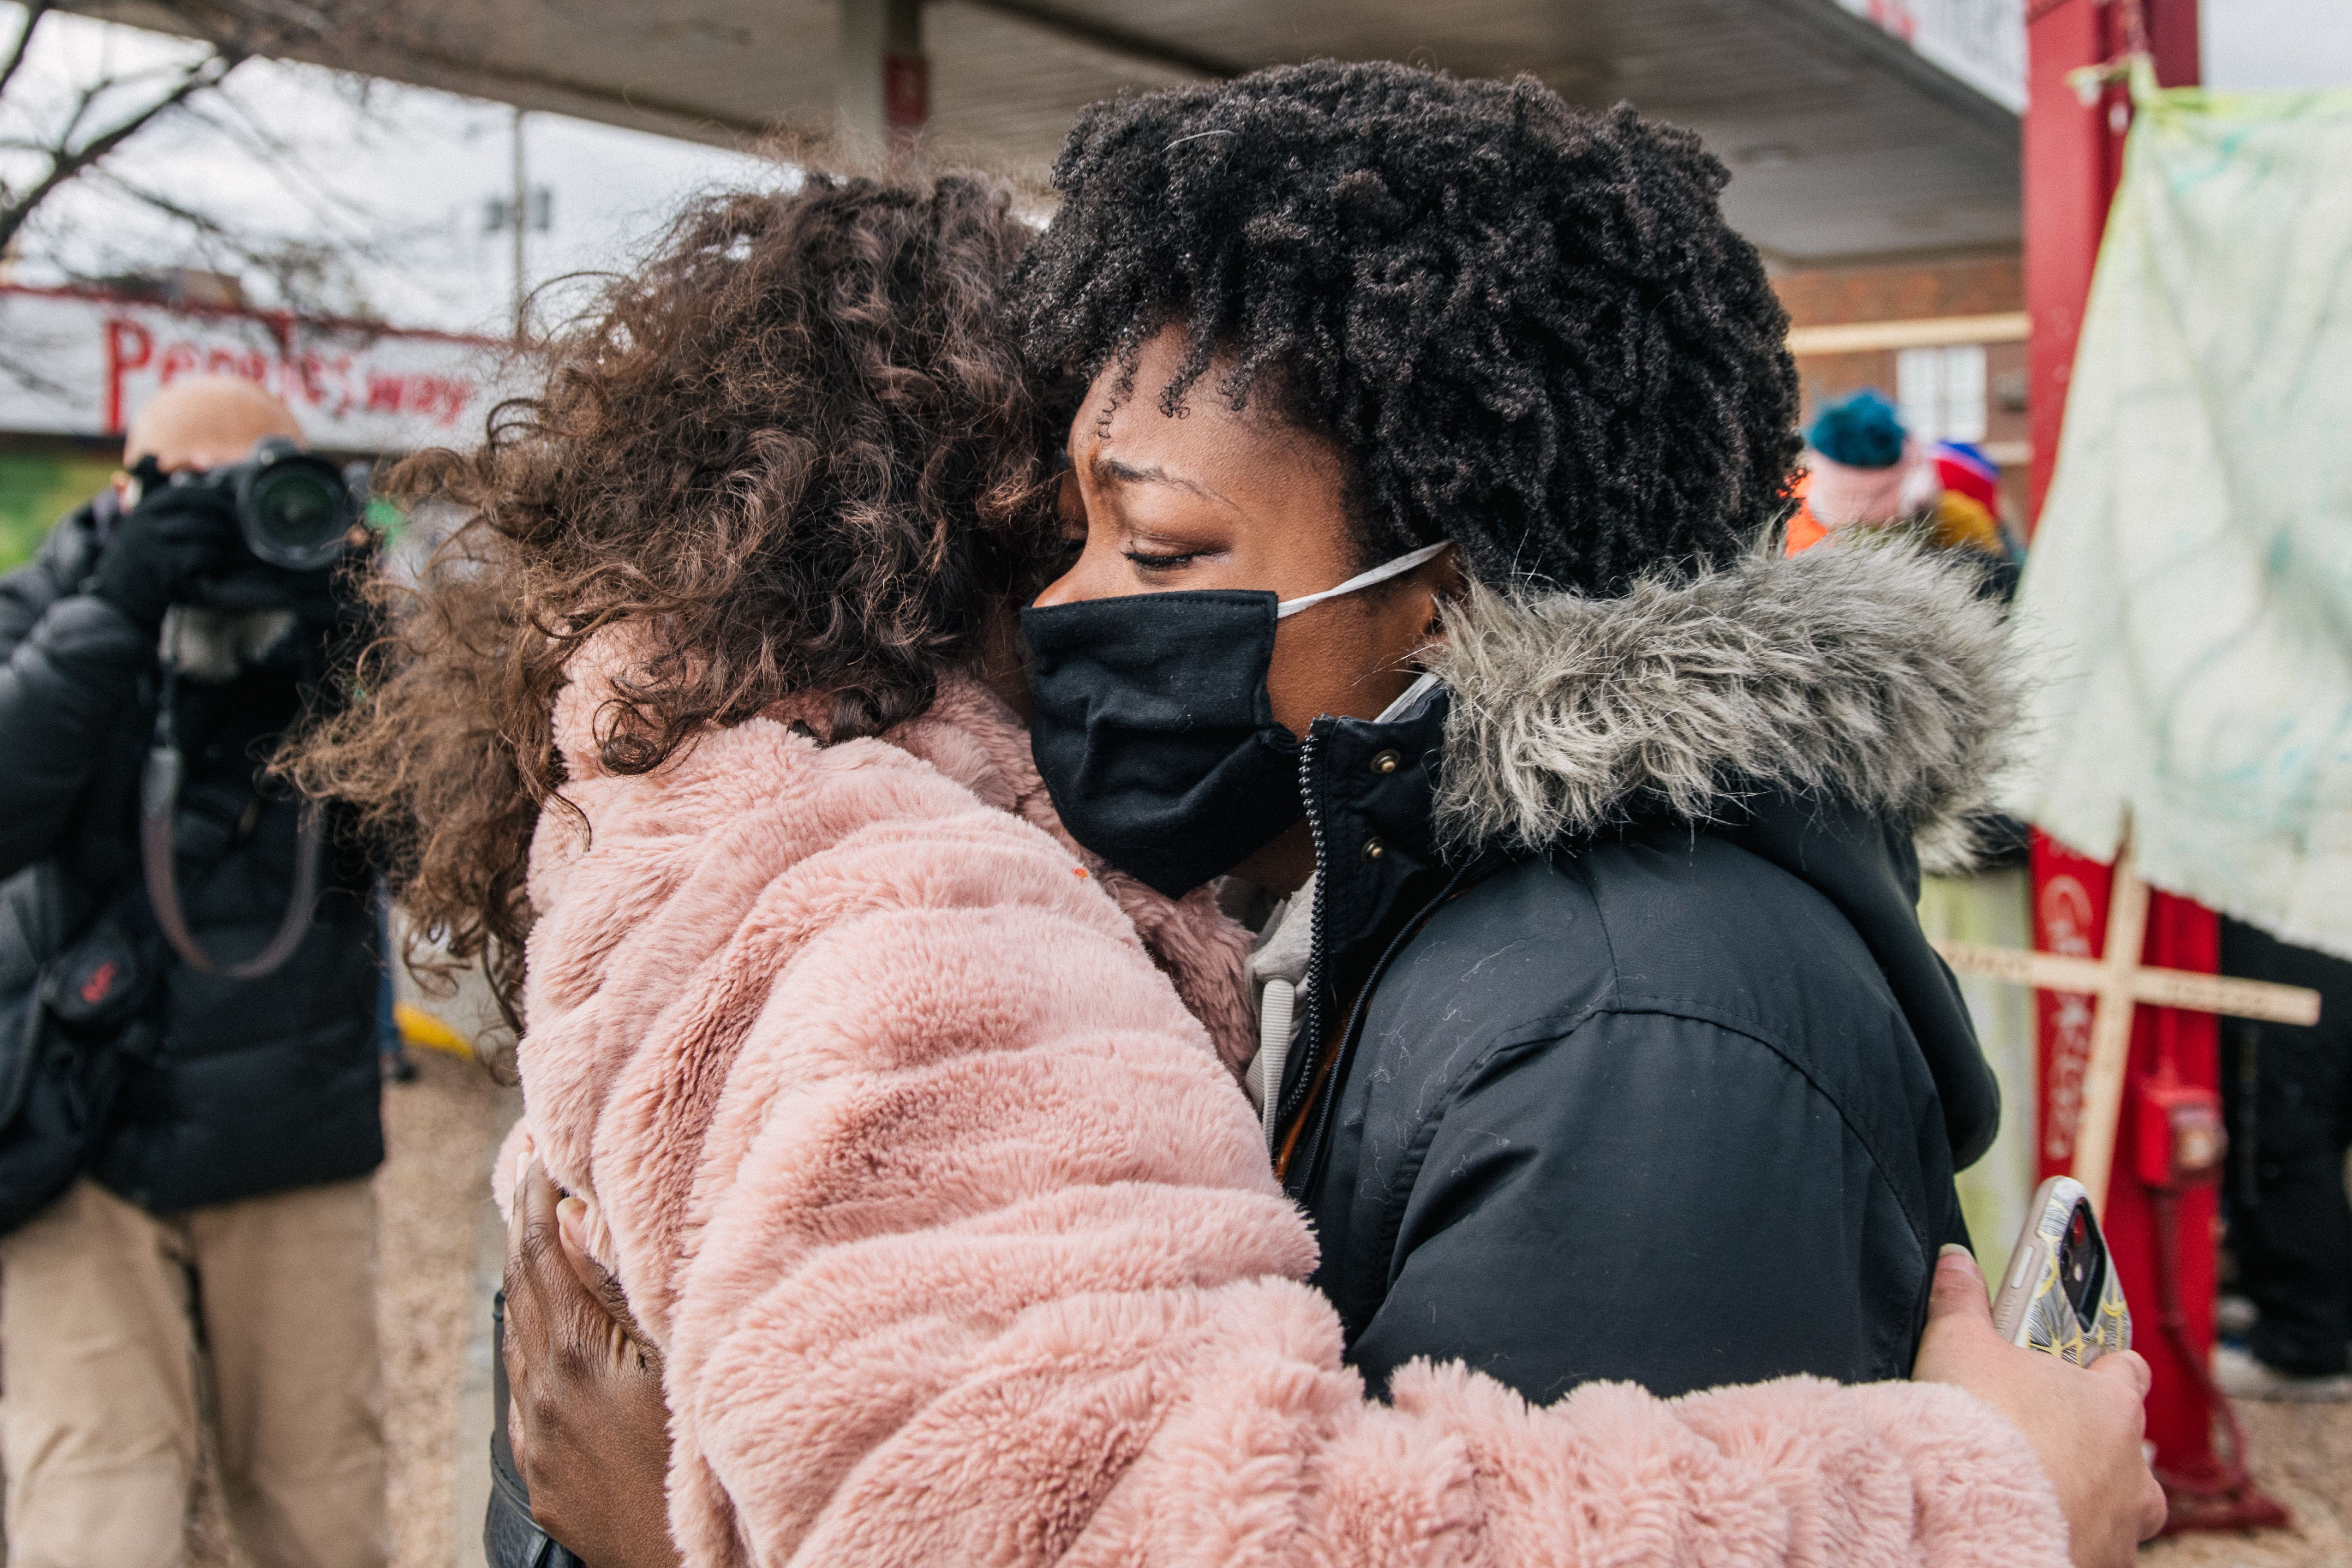 atience Zelanga (R) is embraced after hearing the verdict in Derek Chauvin trial at the intersection of 38th Street and Chicago Avenue on April 20, 2021 in Minneapolis,